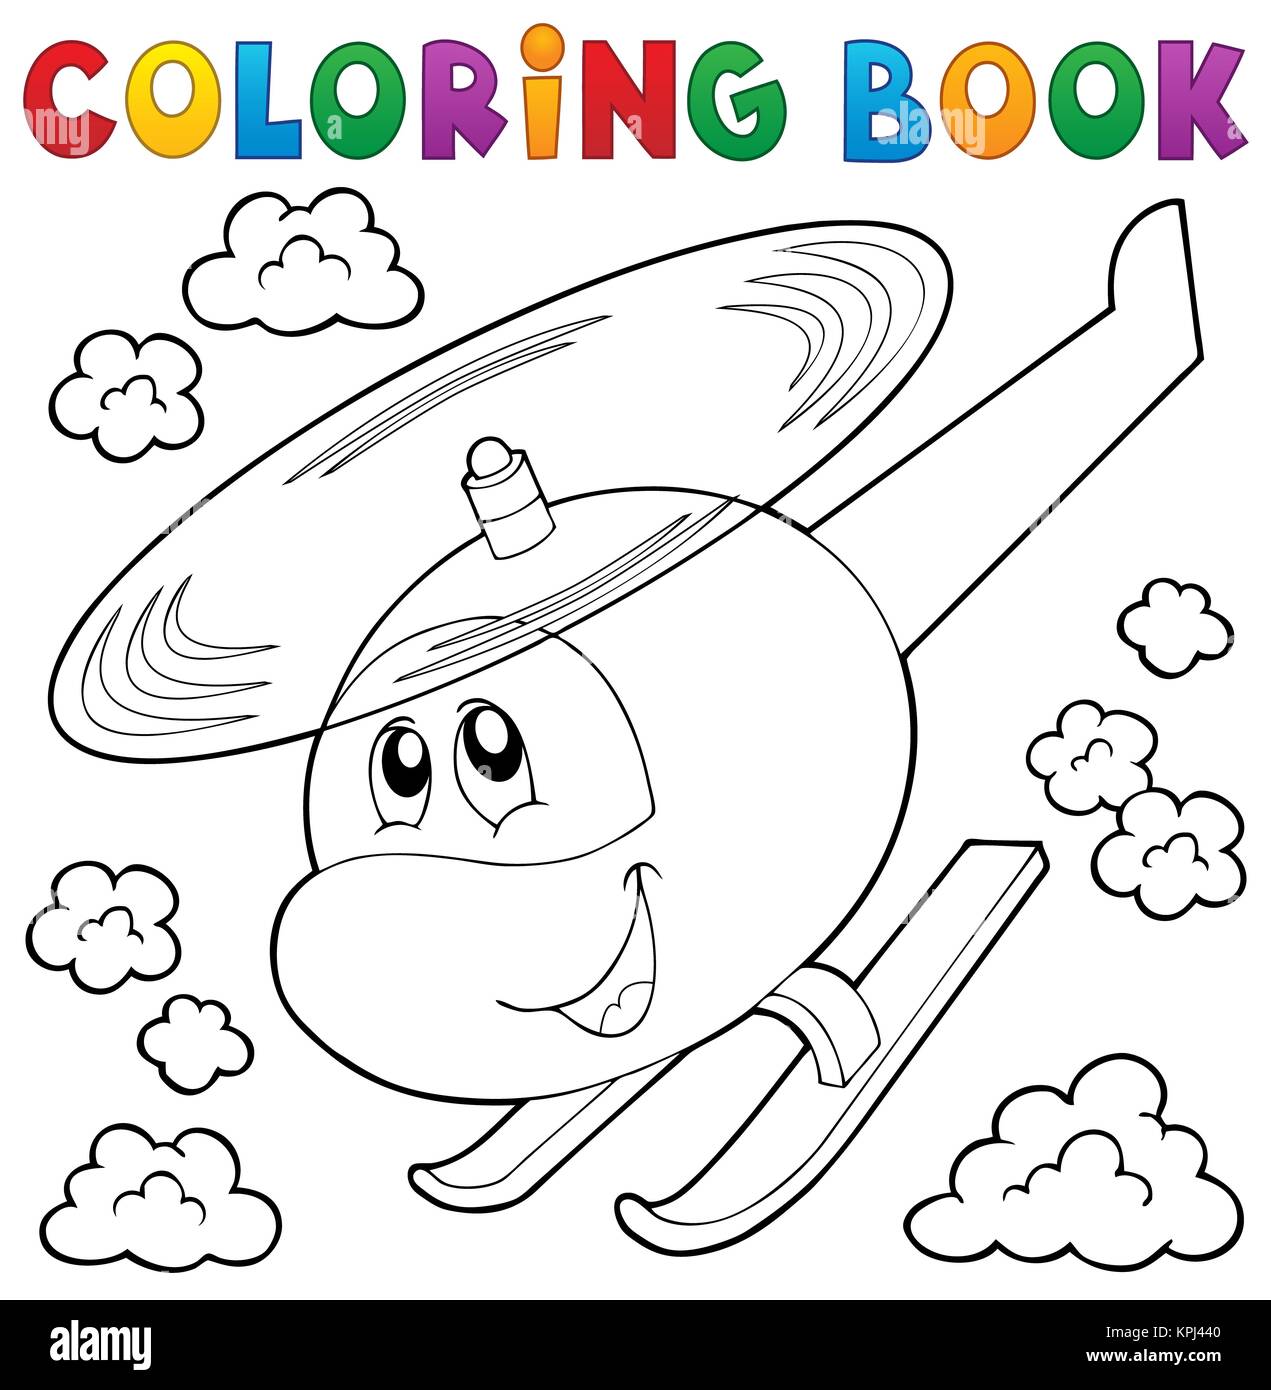 Coloring book helicopter theme 1 Stock Photo